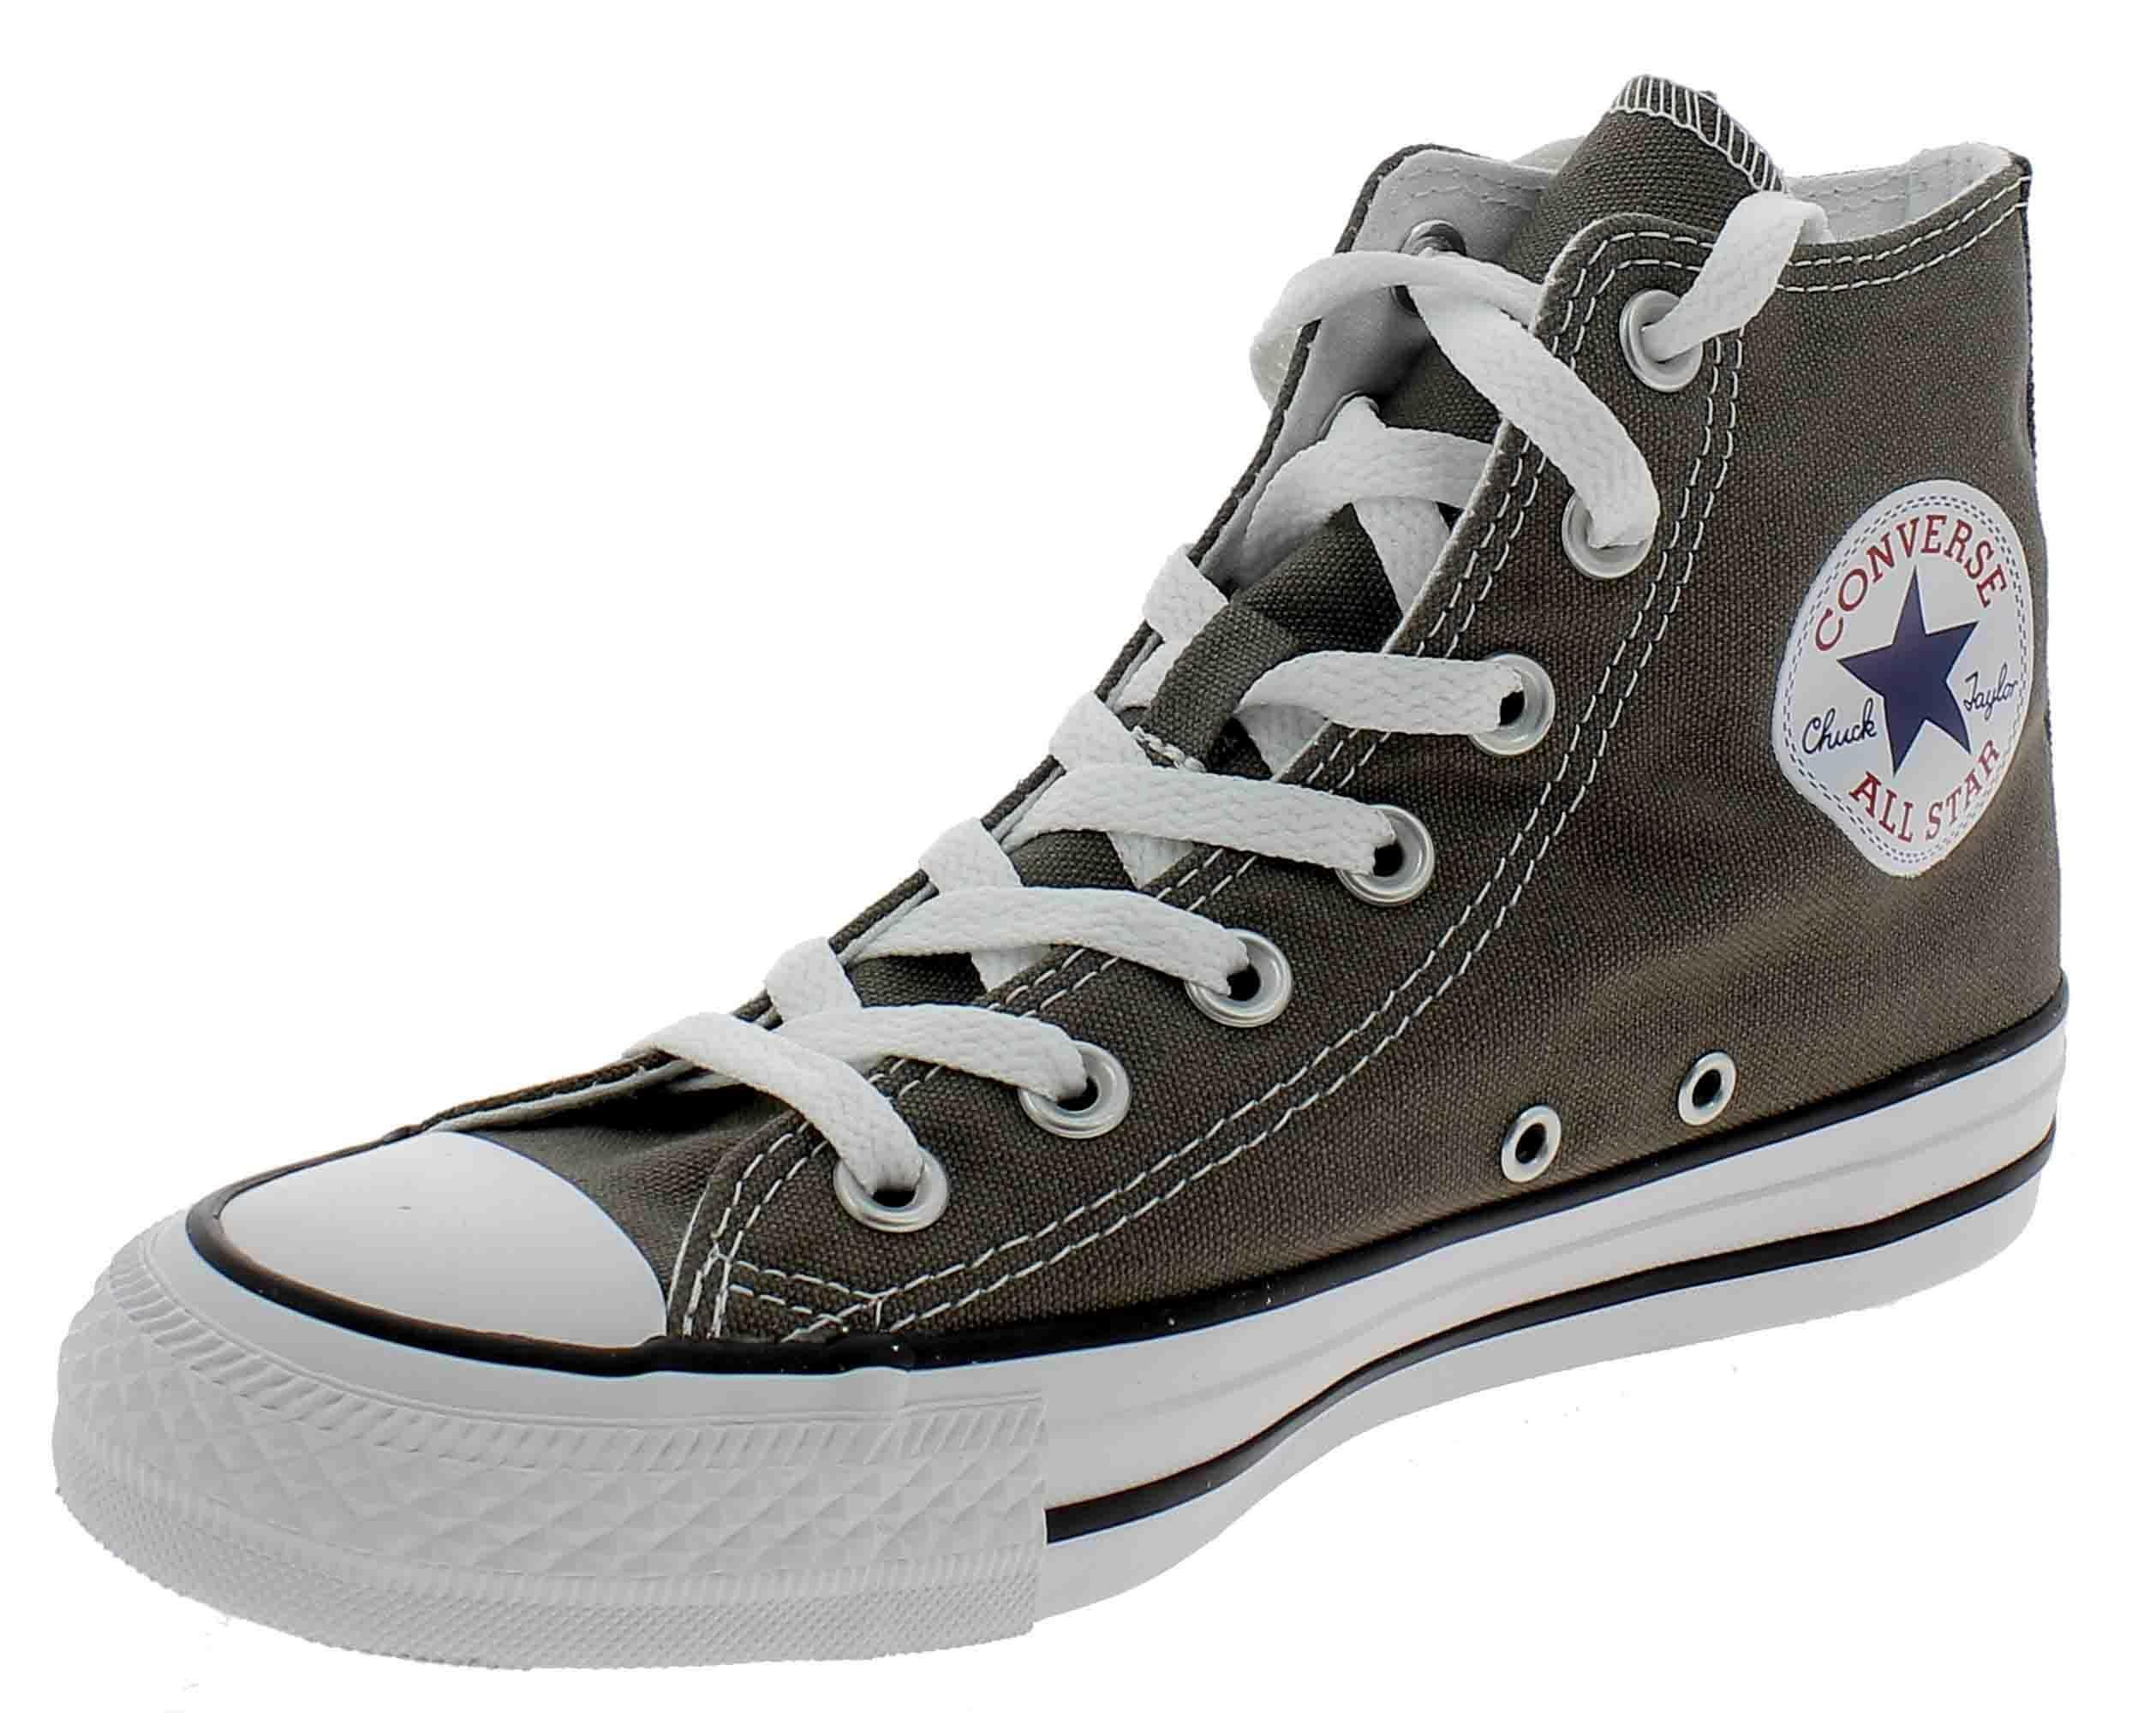 converse grise anthracite